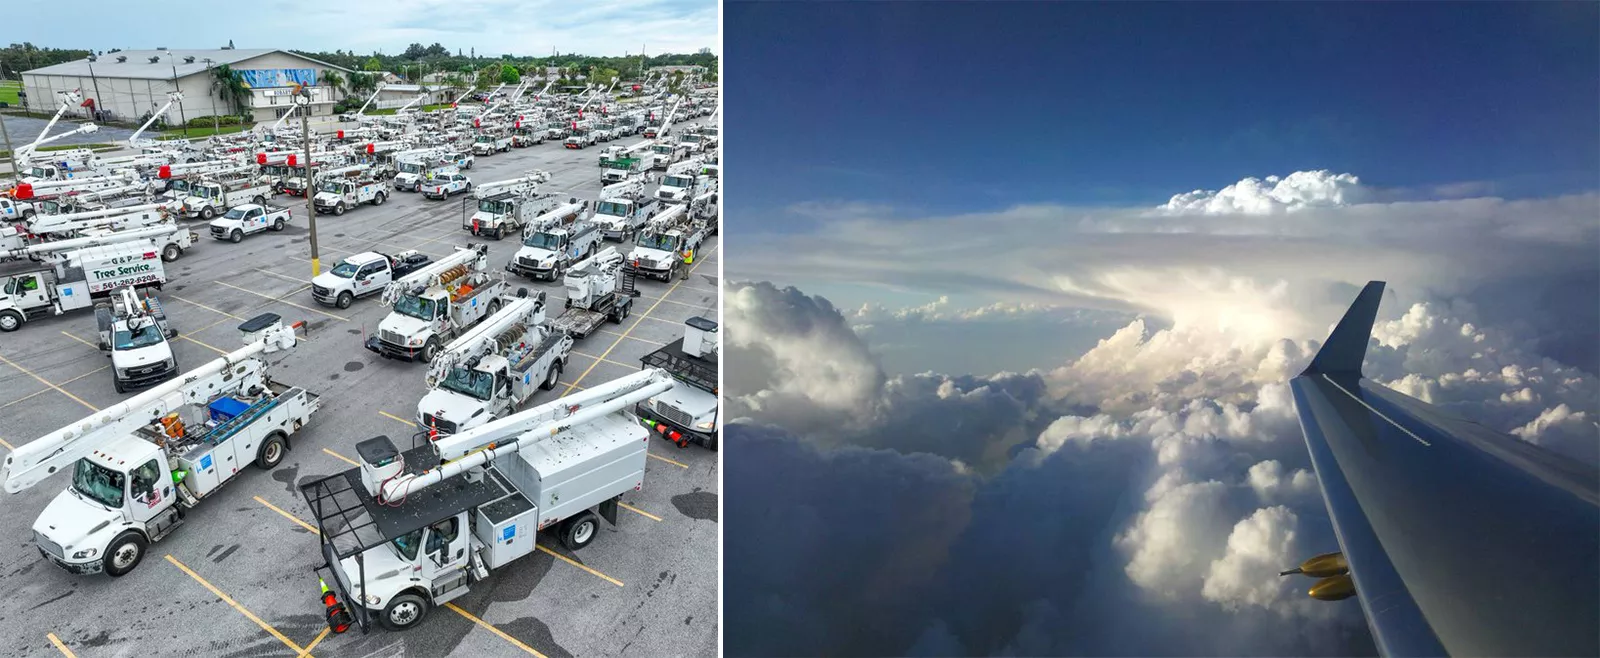 Composite of 2 photos. Left photo is of a parking lot with lots of utility service trucks. Right photo is cumulonimbus cloud “anvil” from the view of an airplane.